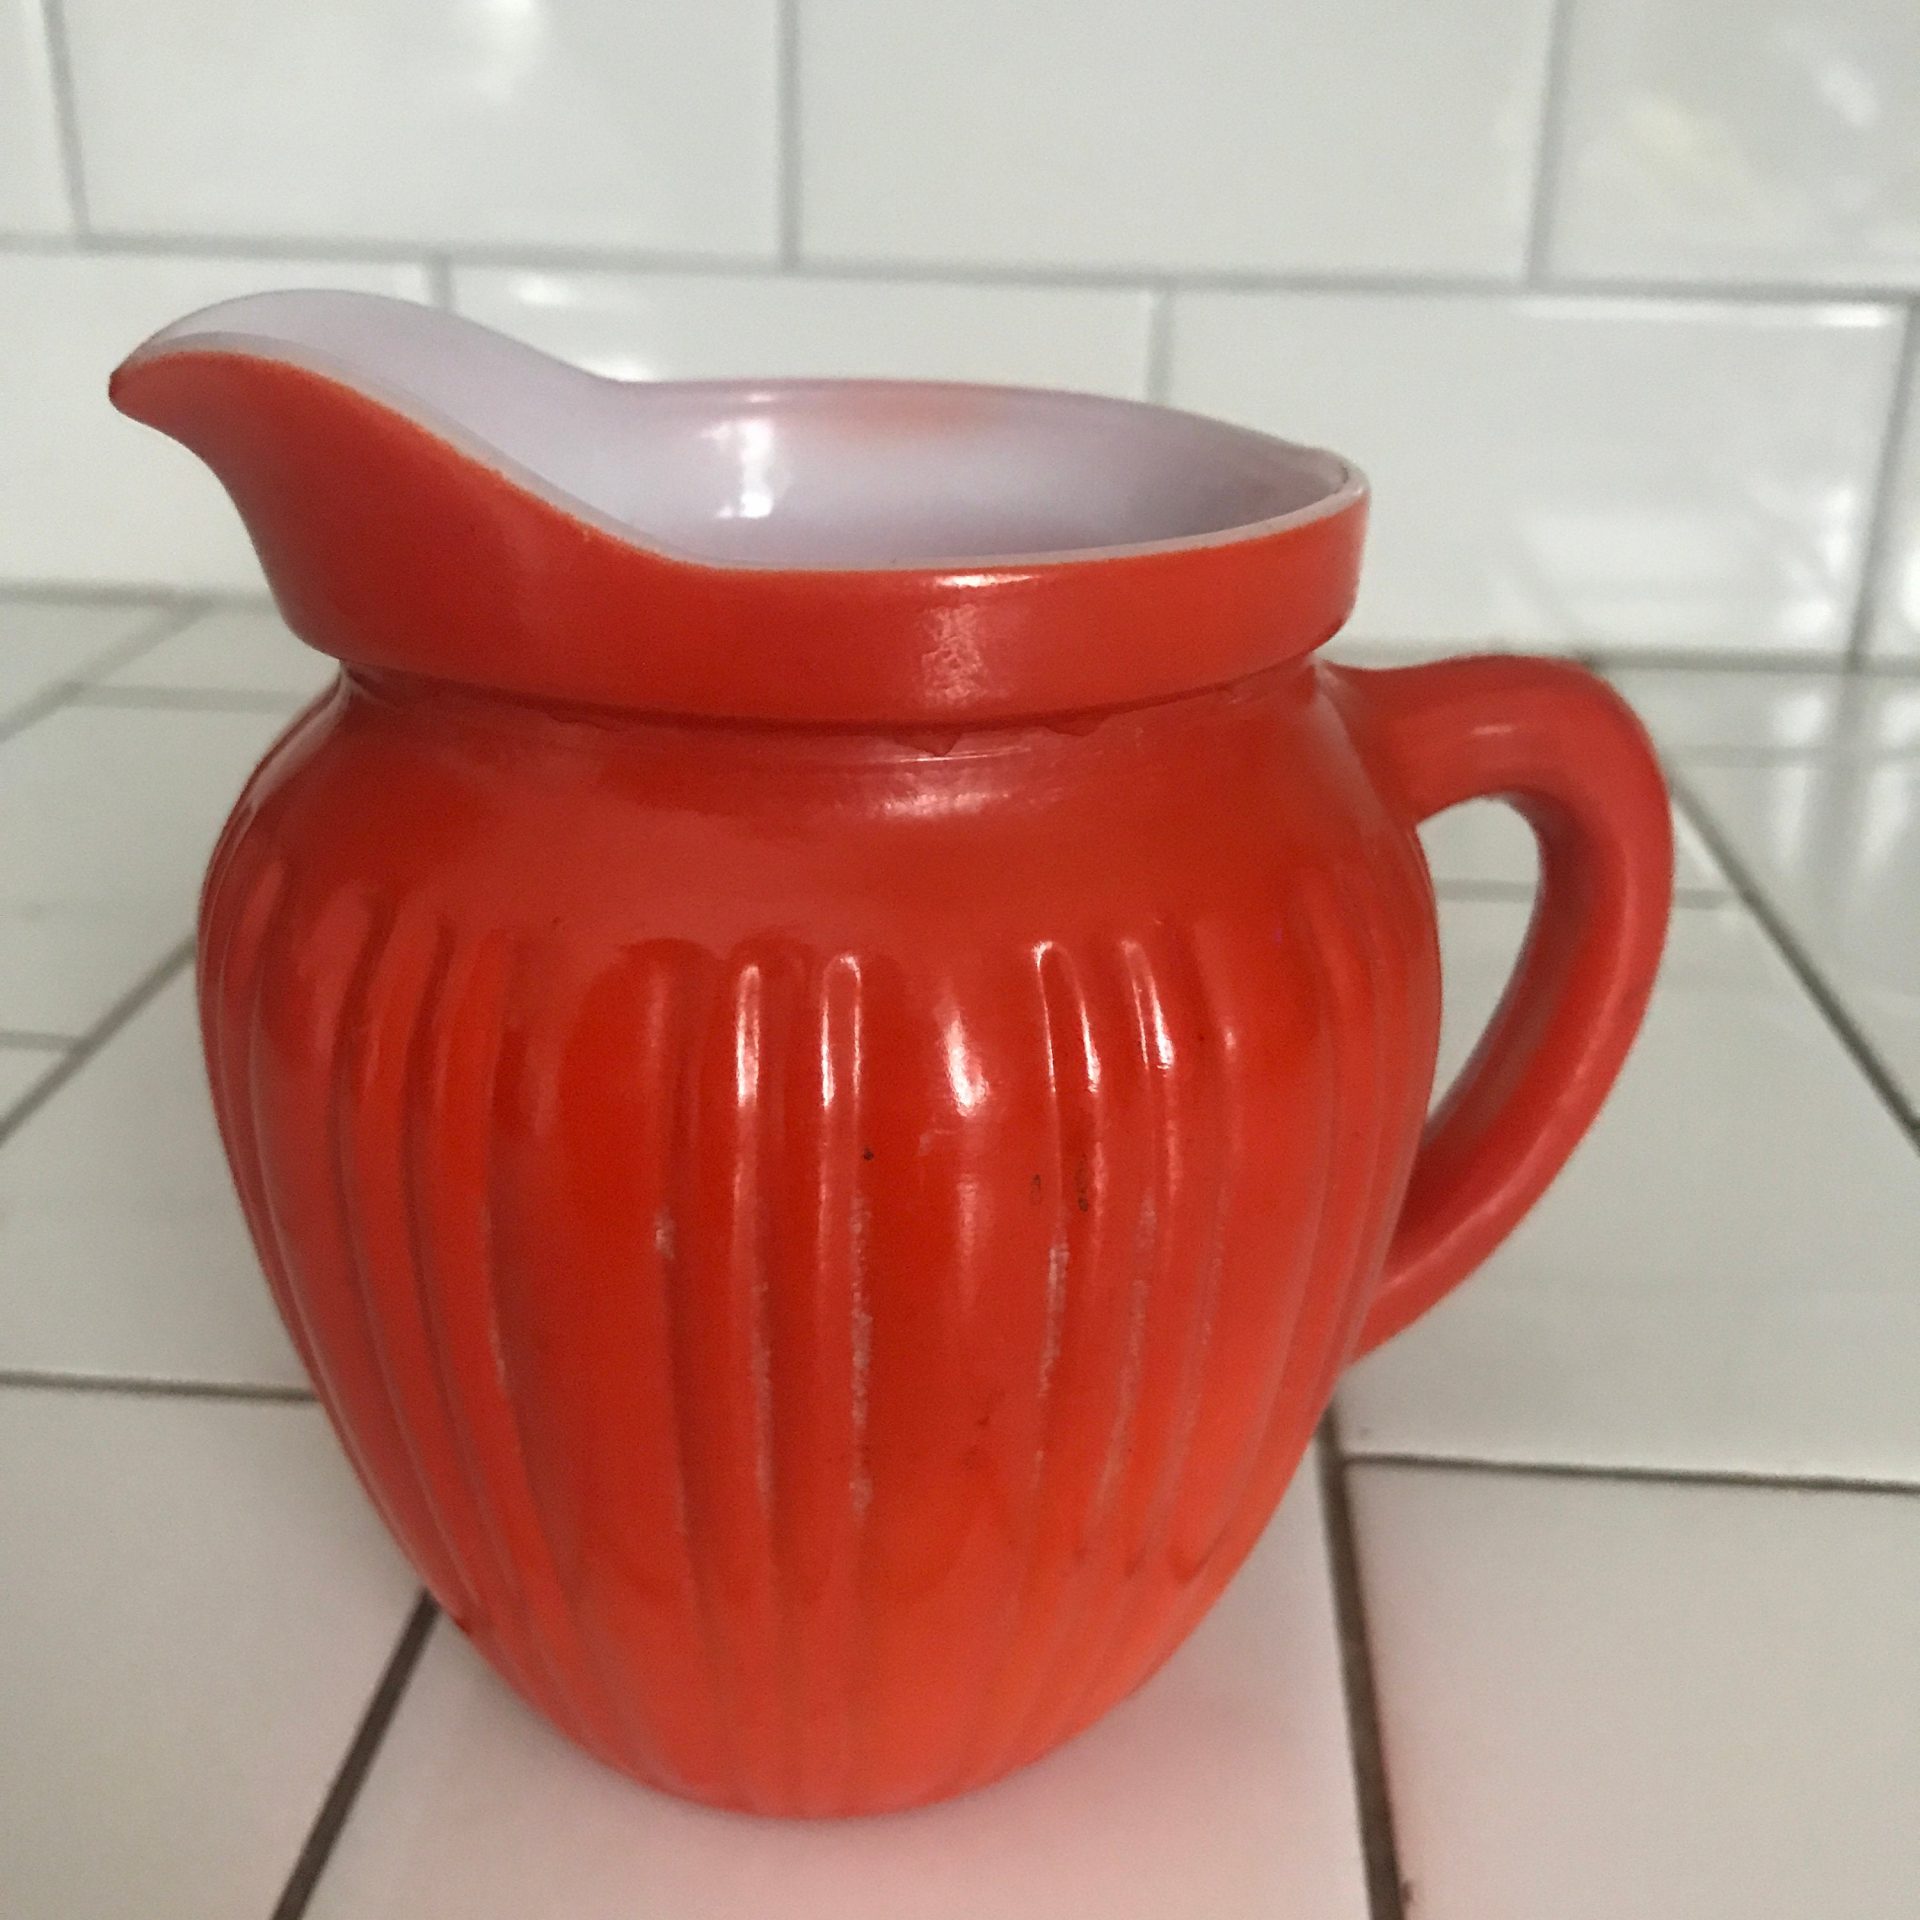 https://www.truevintageantiques.com/wp-content/uploads/2021/05/vintage-cream-pitcher-orange-fired-on-paint-white-milk-glass-ribbed-farmhouse-cottage-collectible-kitchen-decor-609926703-scaled.jpg